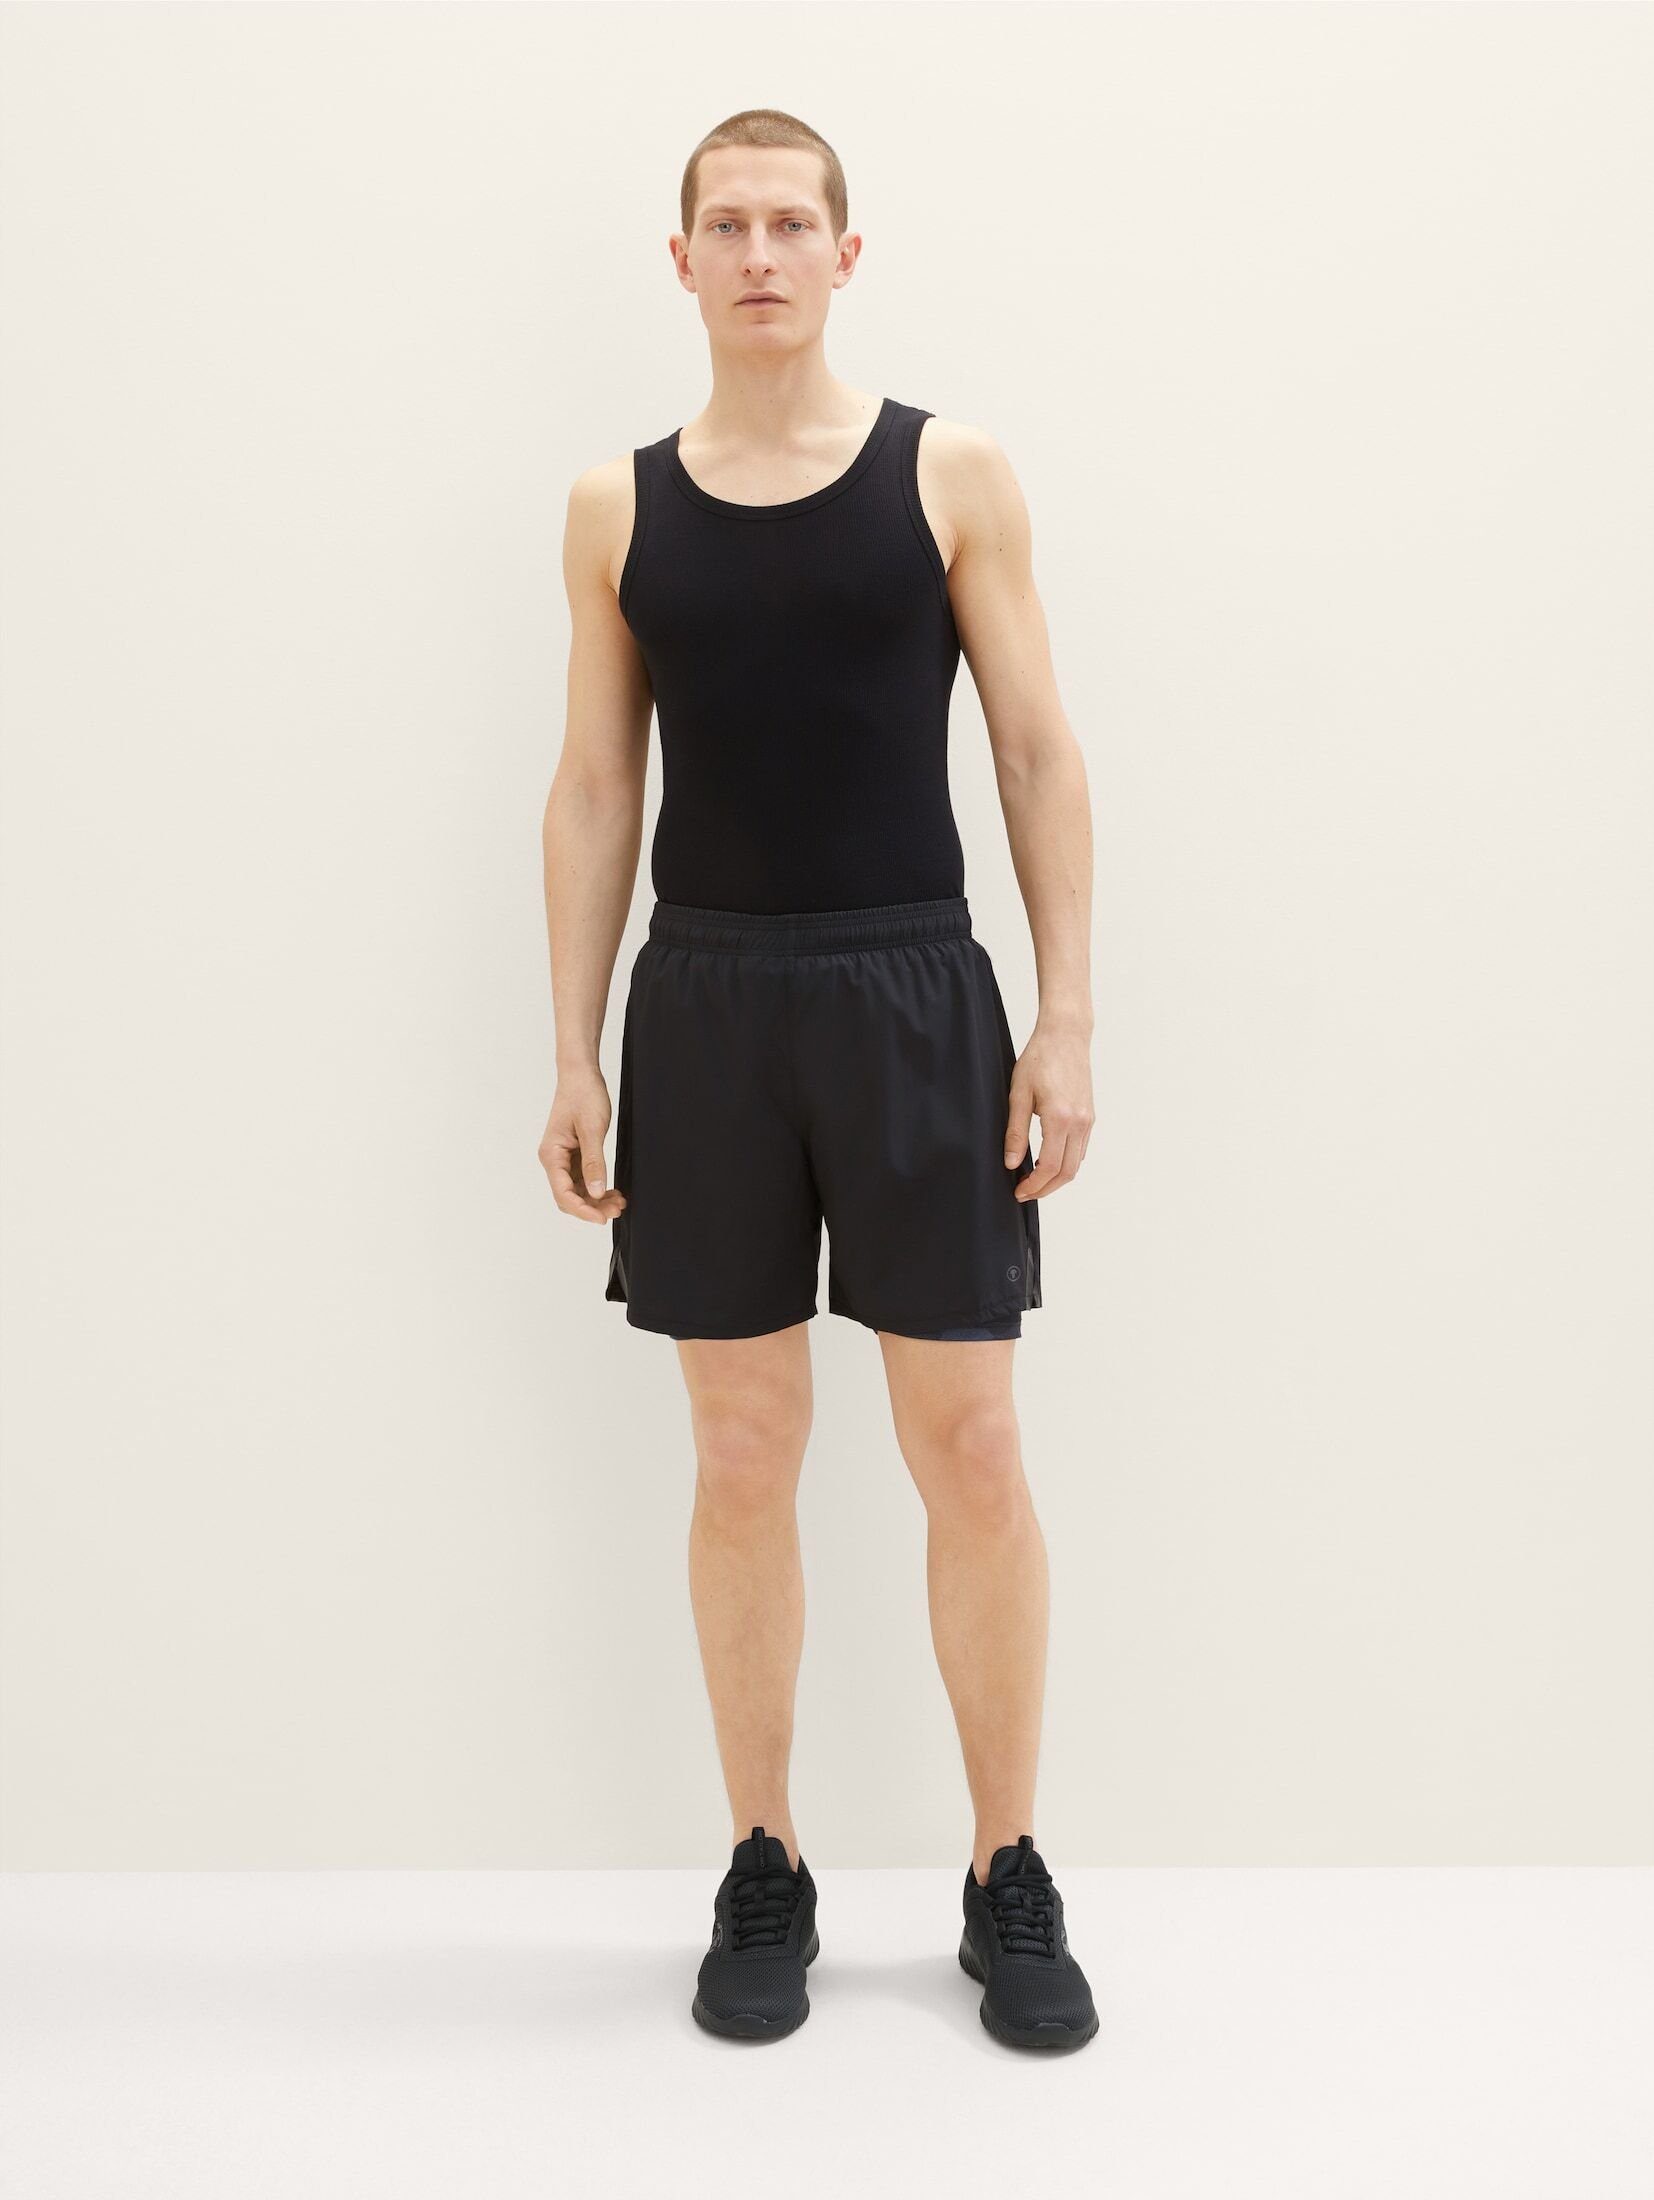 TOM TAILOR Funktionsshorts 2-in-1 Shorts